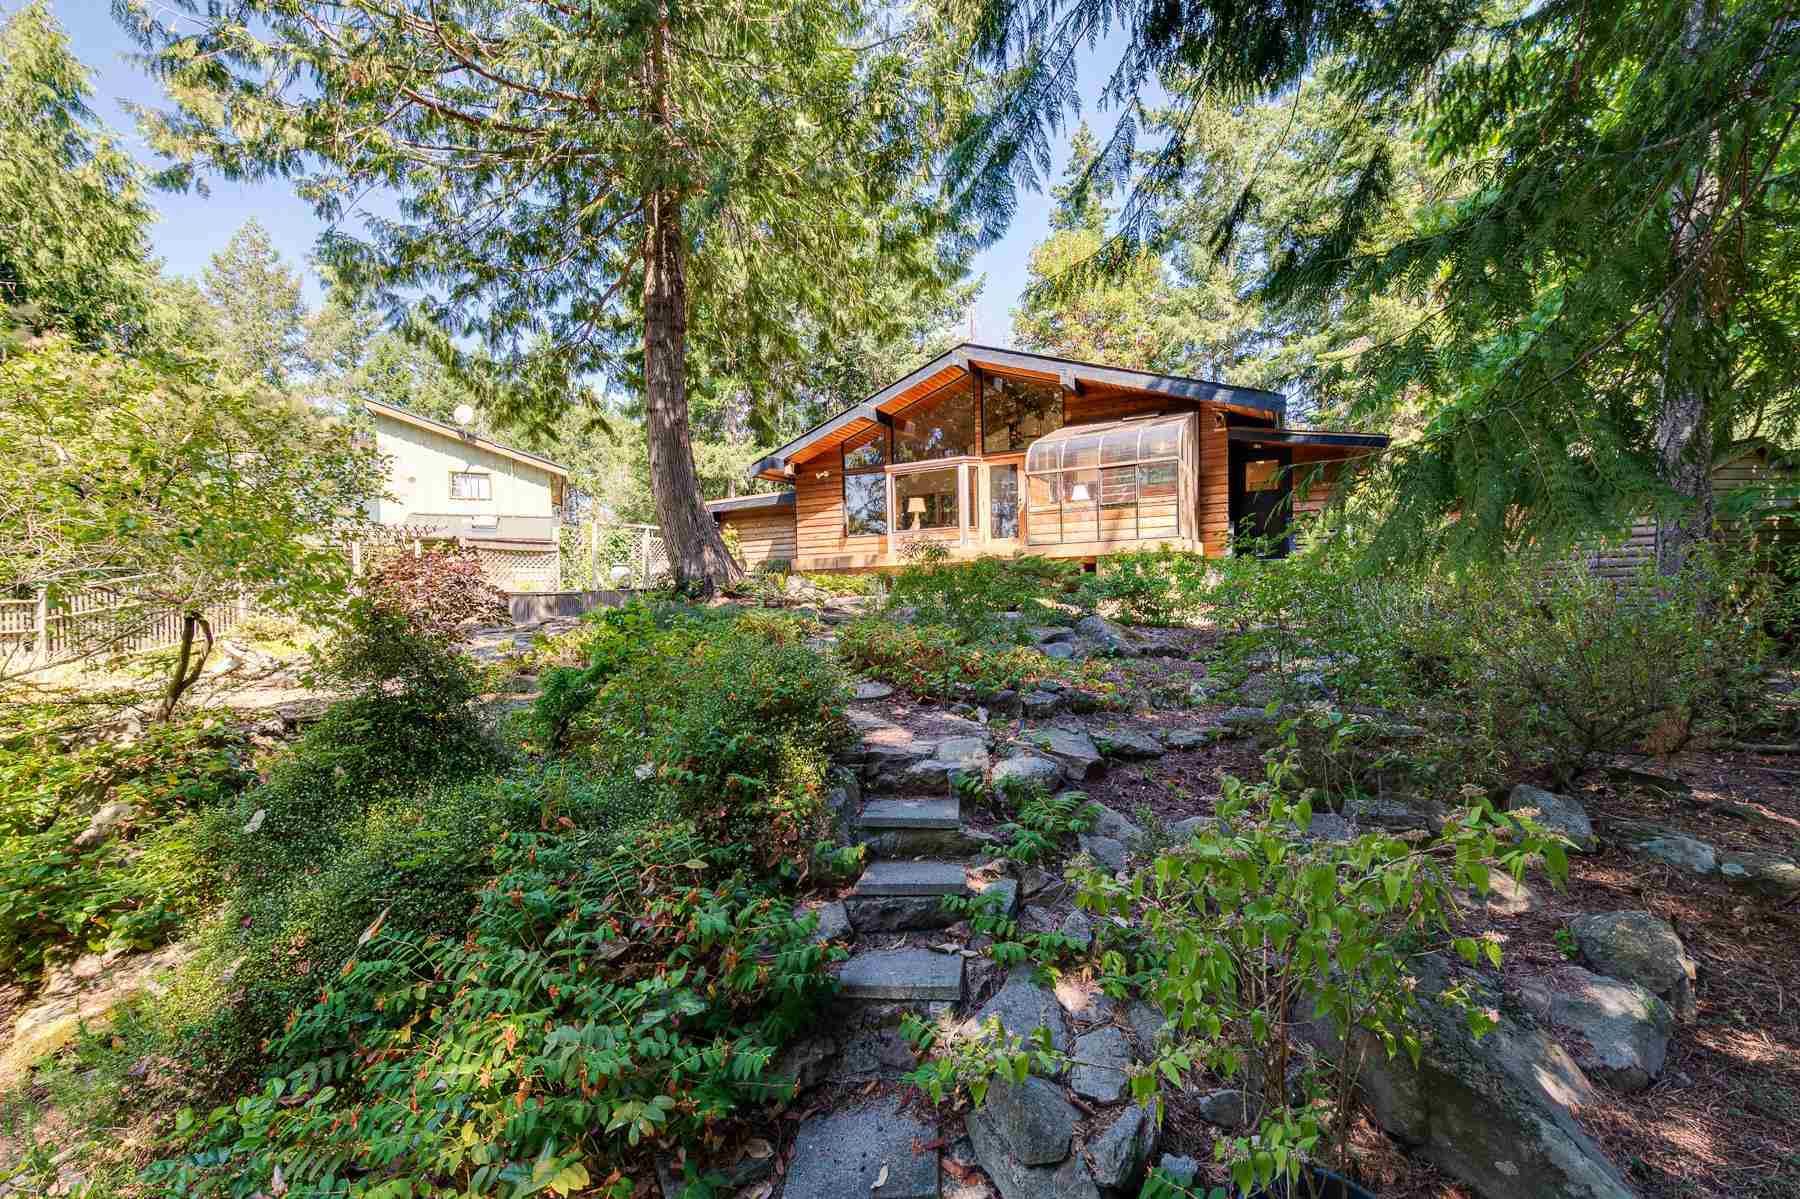 Main Photo: 256 SPINNAKER DRIVE in : Mayne Island House for sale : MLS®# R2602555